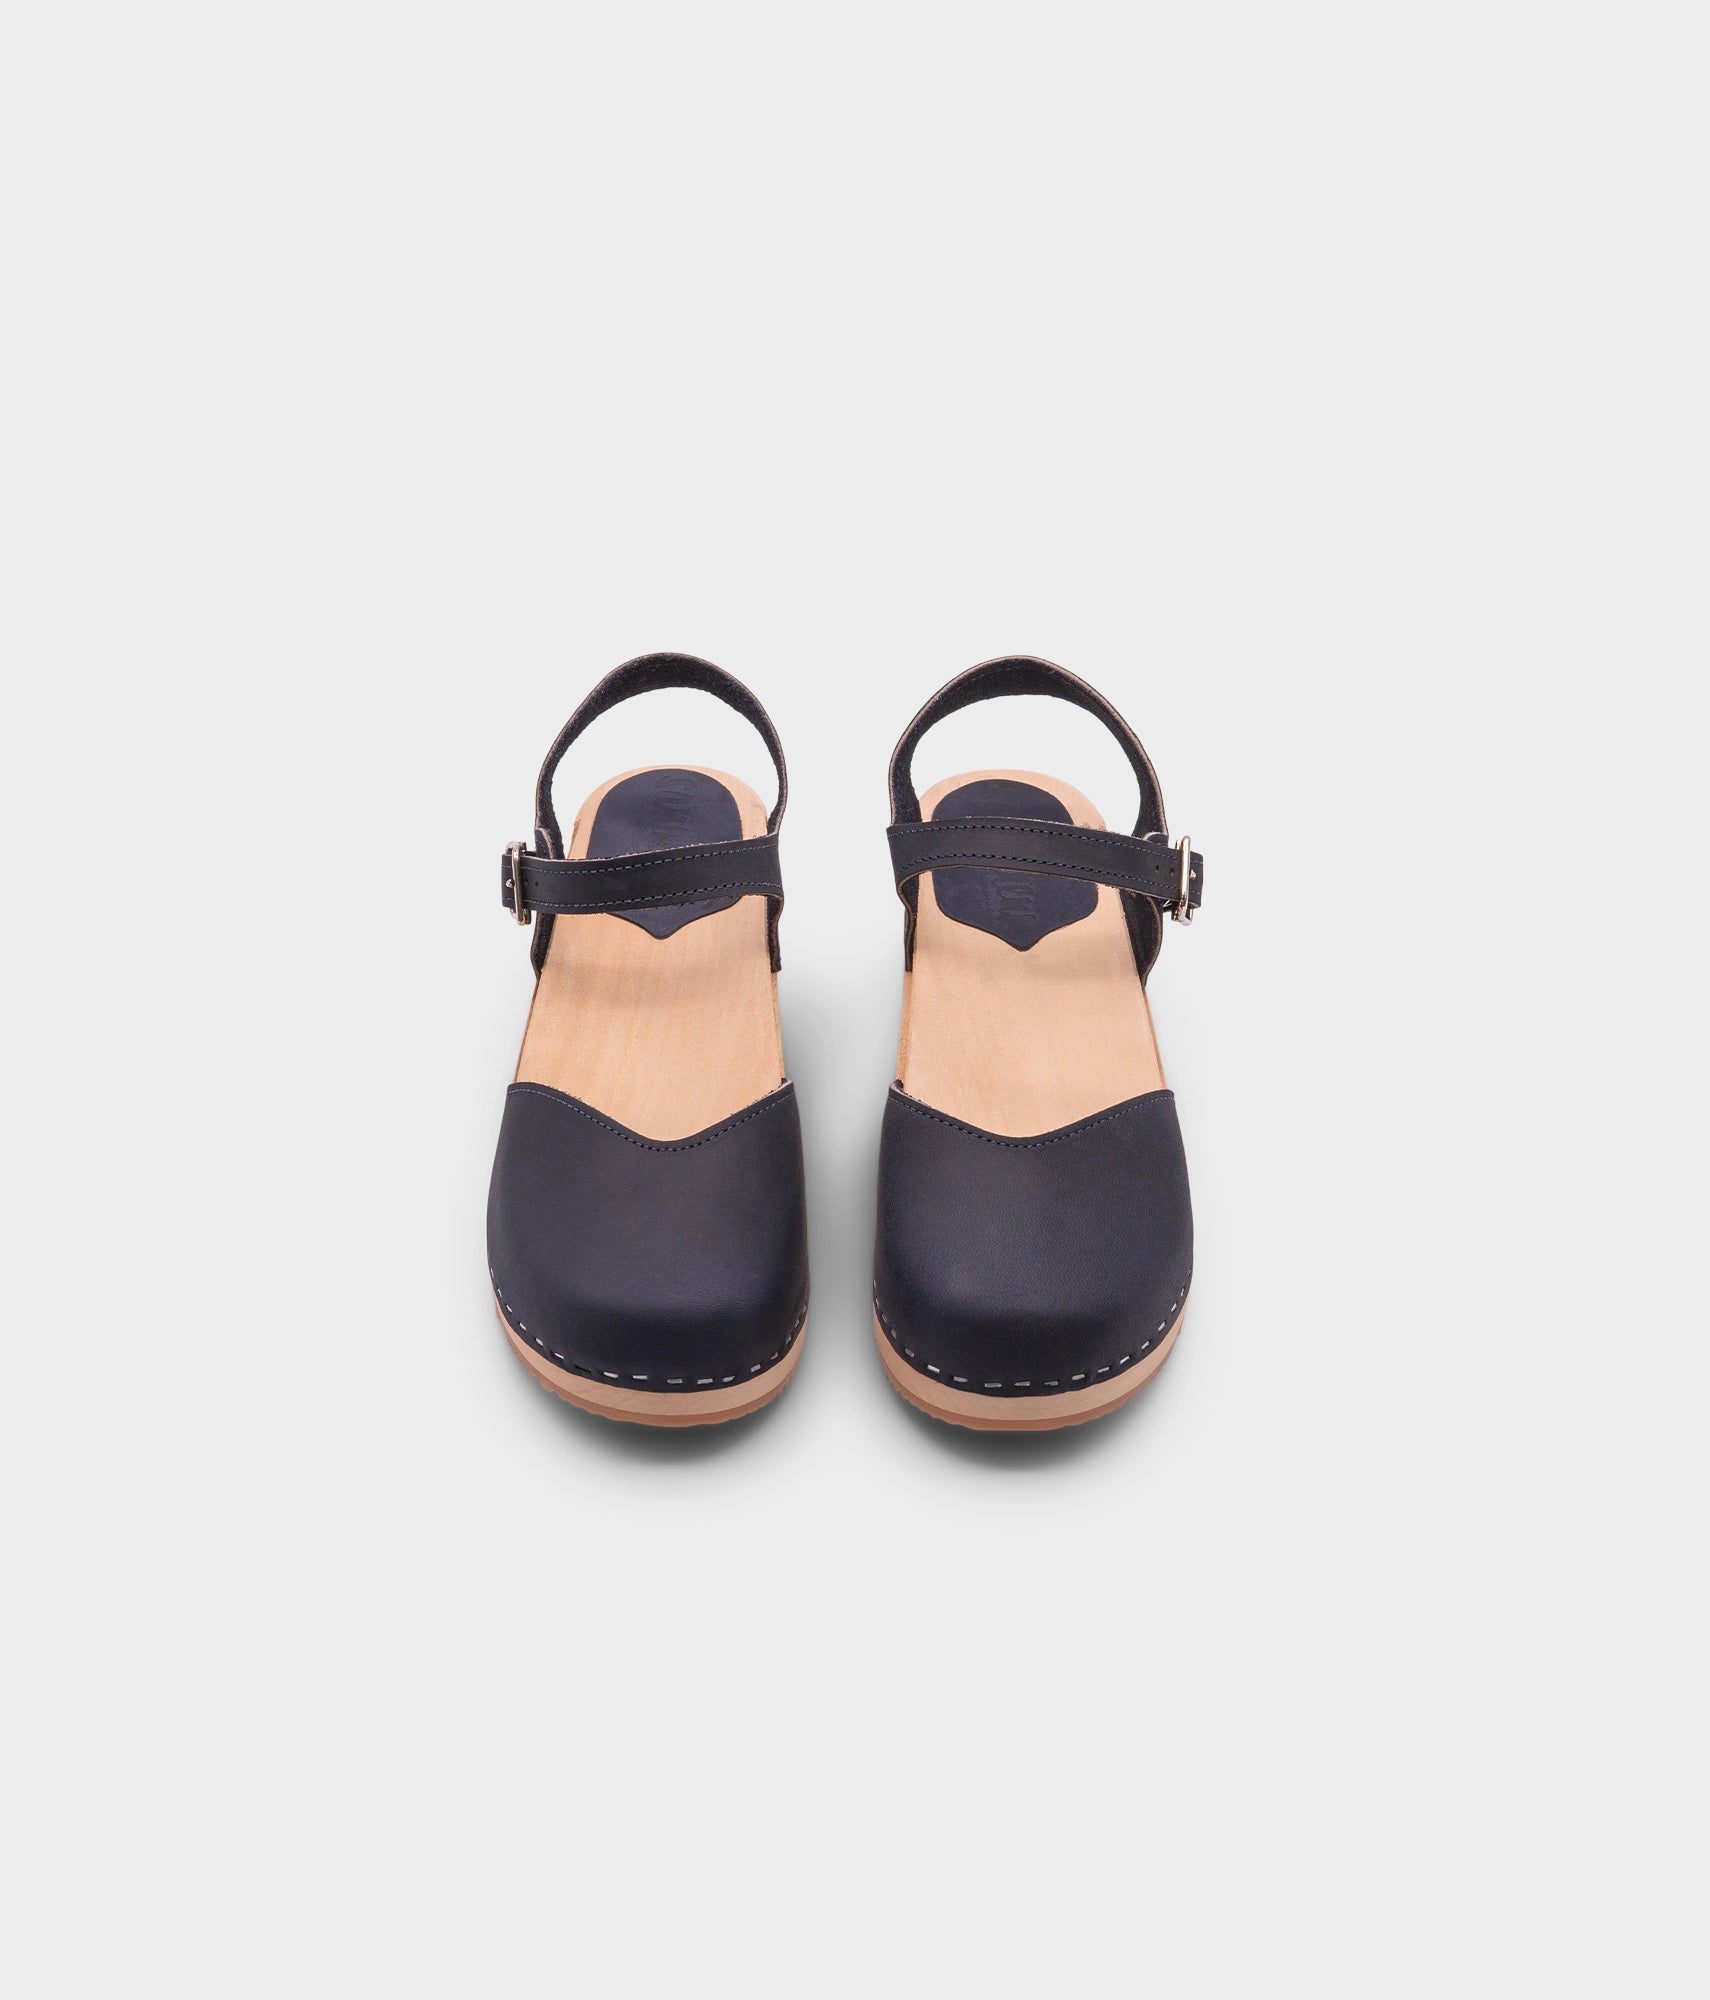 classic low heeled closed-toe sandal in navy blue nubuck leather stapled on a light wooden base